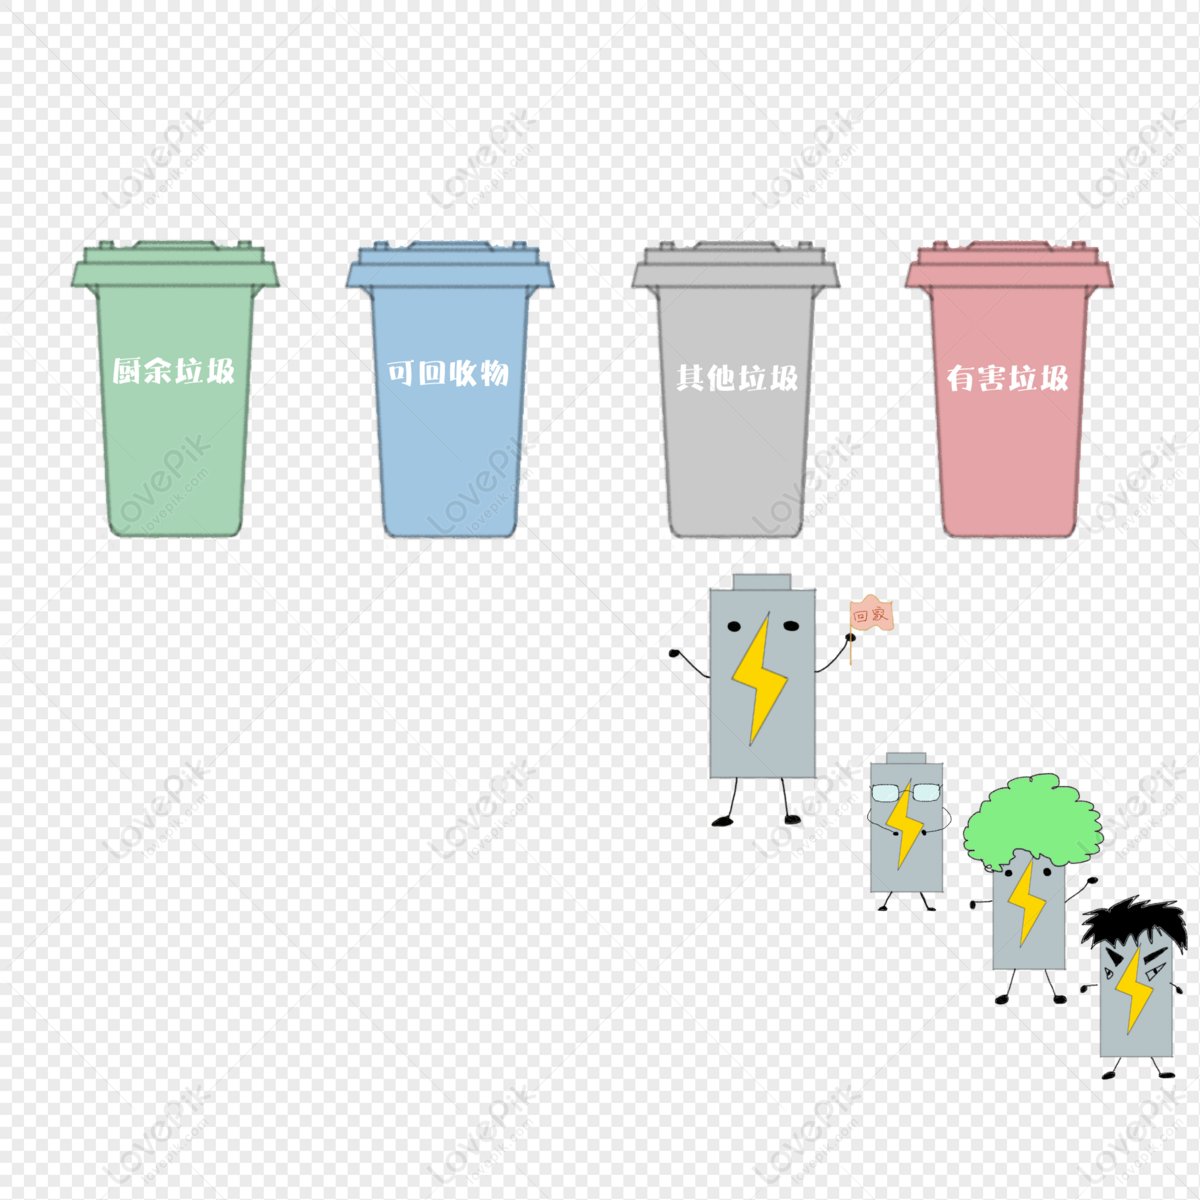 Vector Cartoon Illustration Of Dirty Garbage Can Trash Bin Or Waste  Container Stock Illustration - Download Image Now - iStock